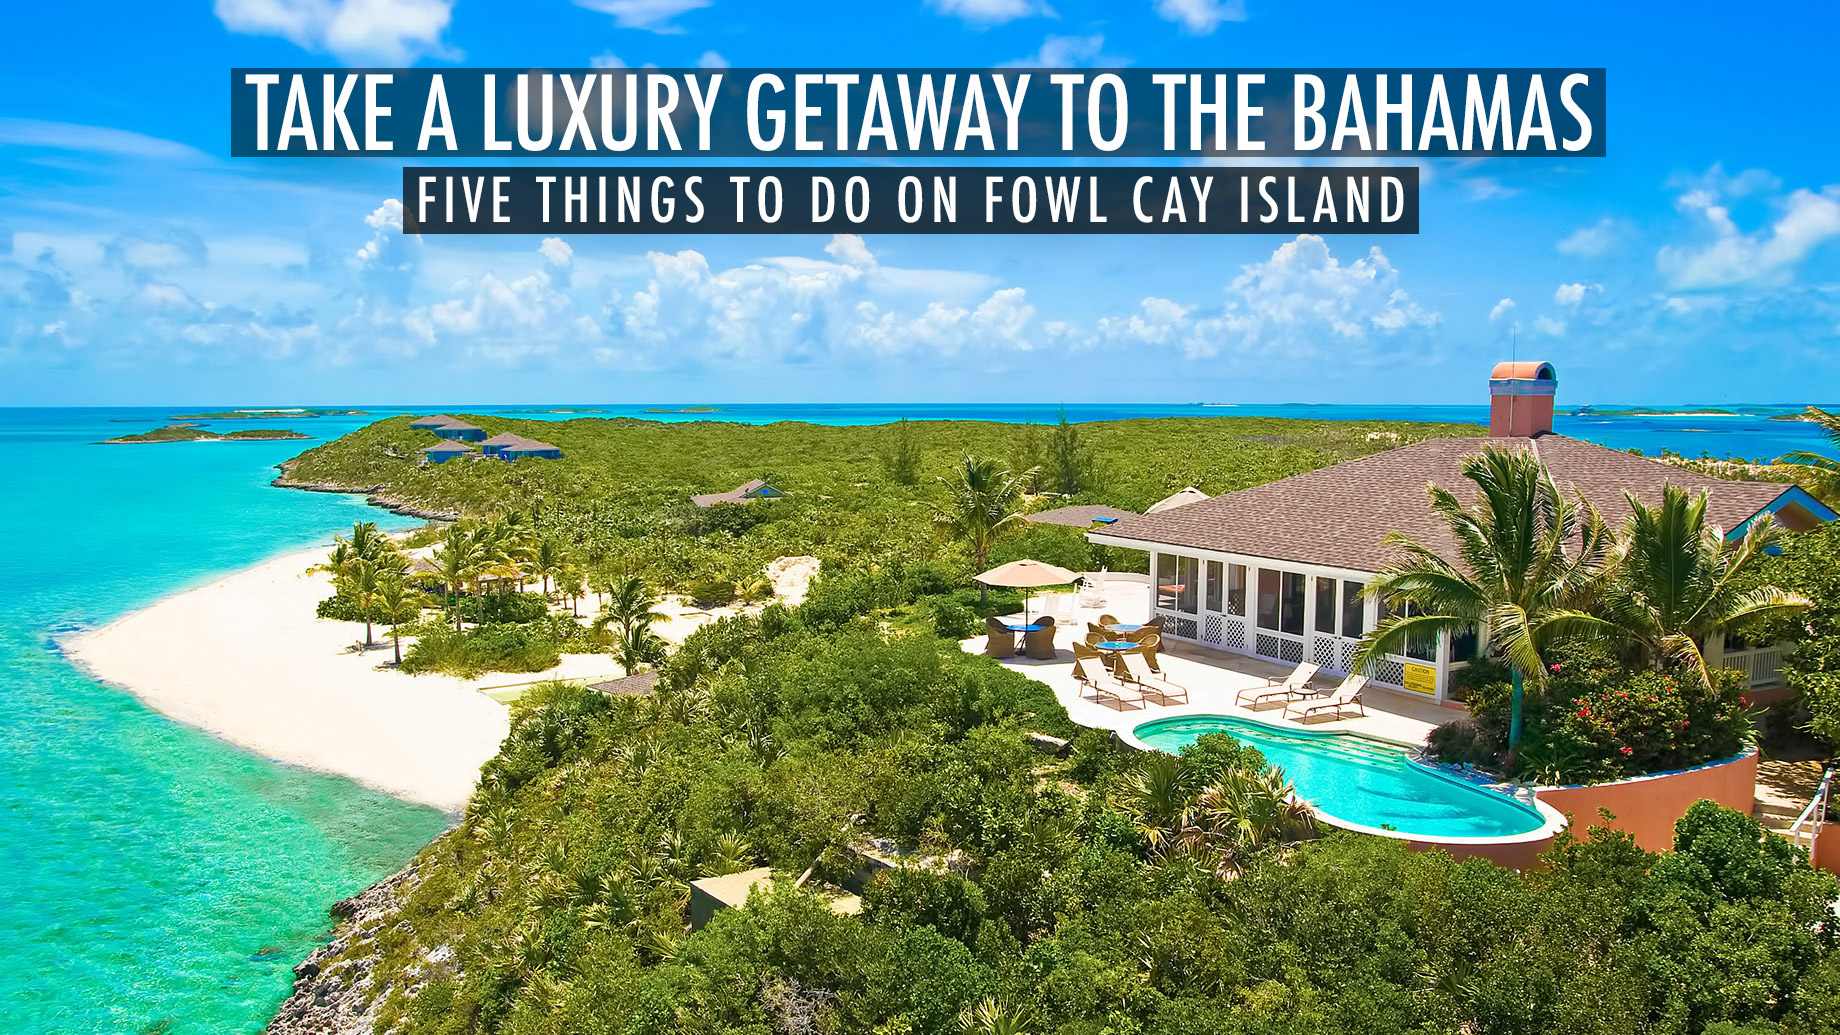 Take A Luxury Getaway To The Bahamas - Five Things To Do On Fowl Cay Island